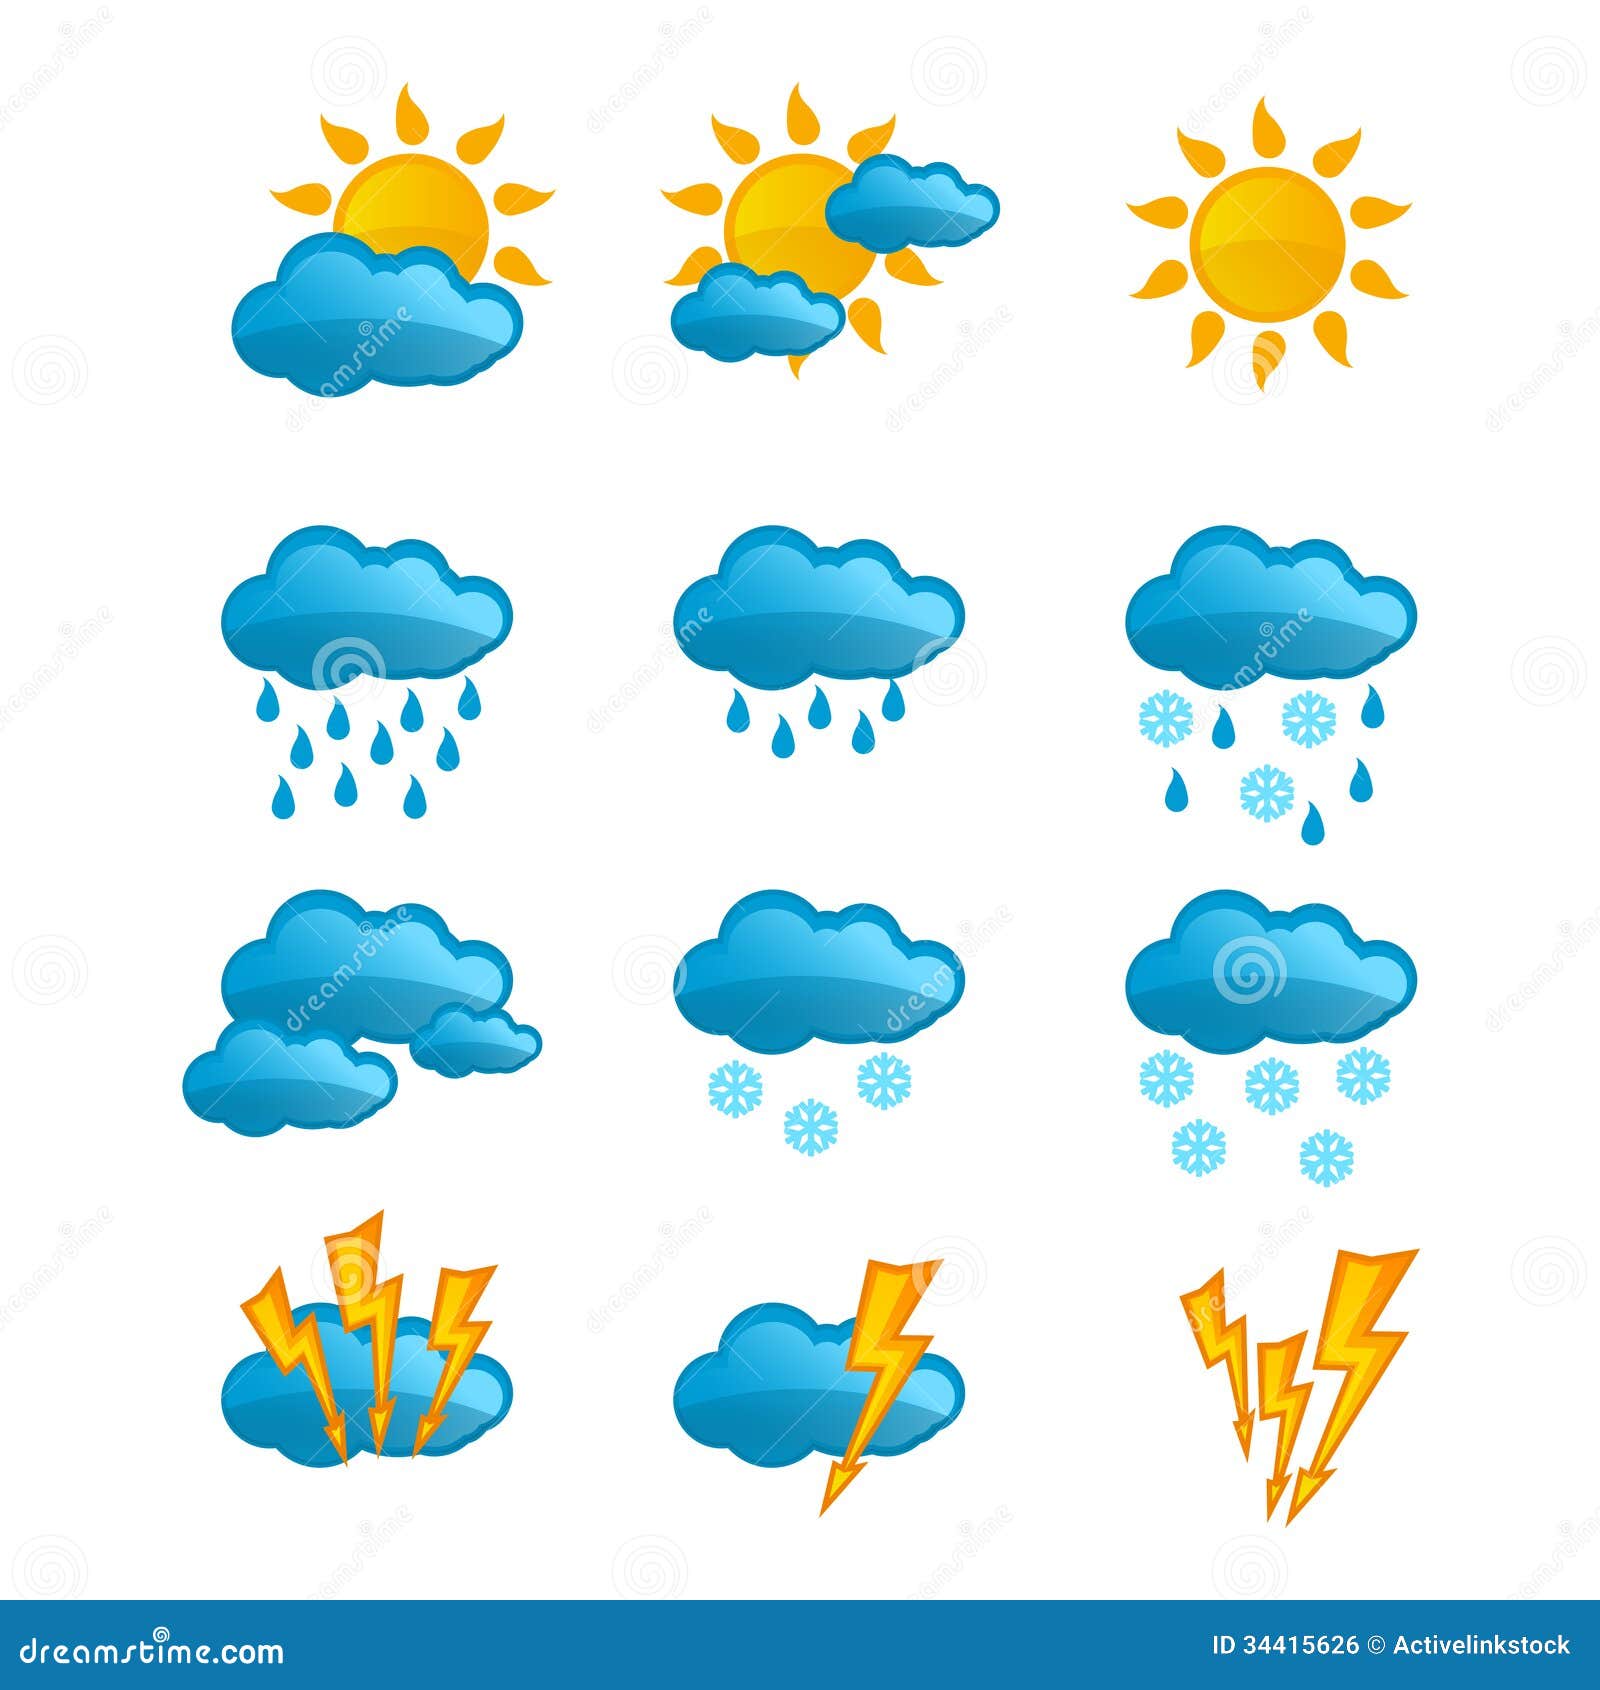 Set Vector Weather Icons Royalty Free Stock Image - Image ...